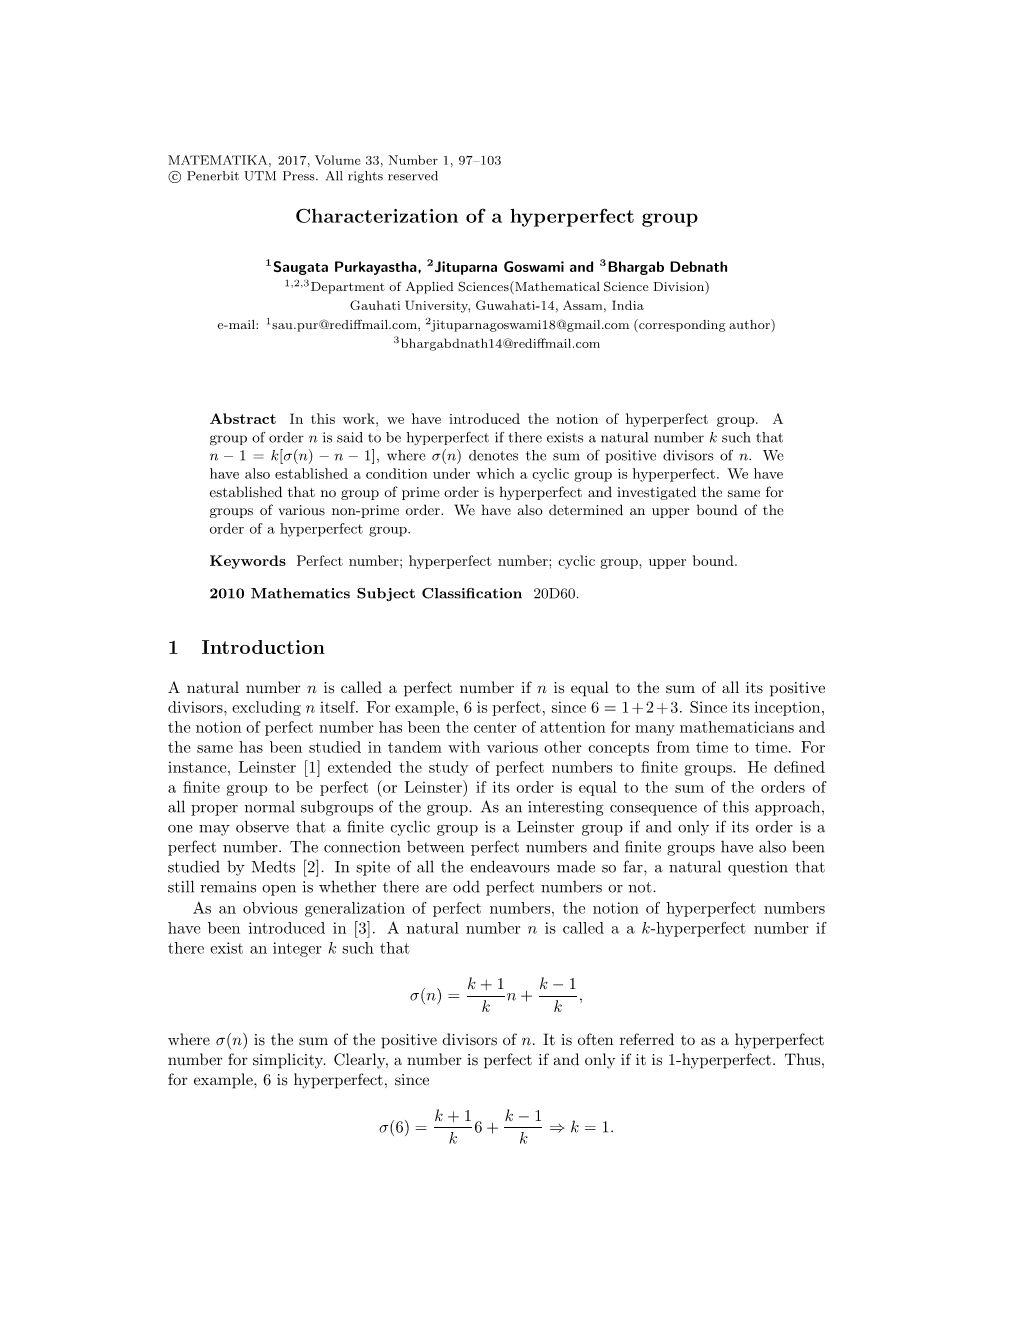 Characterization of a Hyperperfect Group 1 Introduction